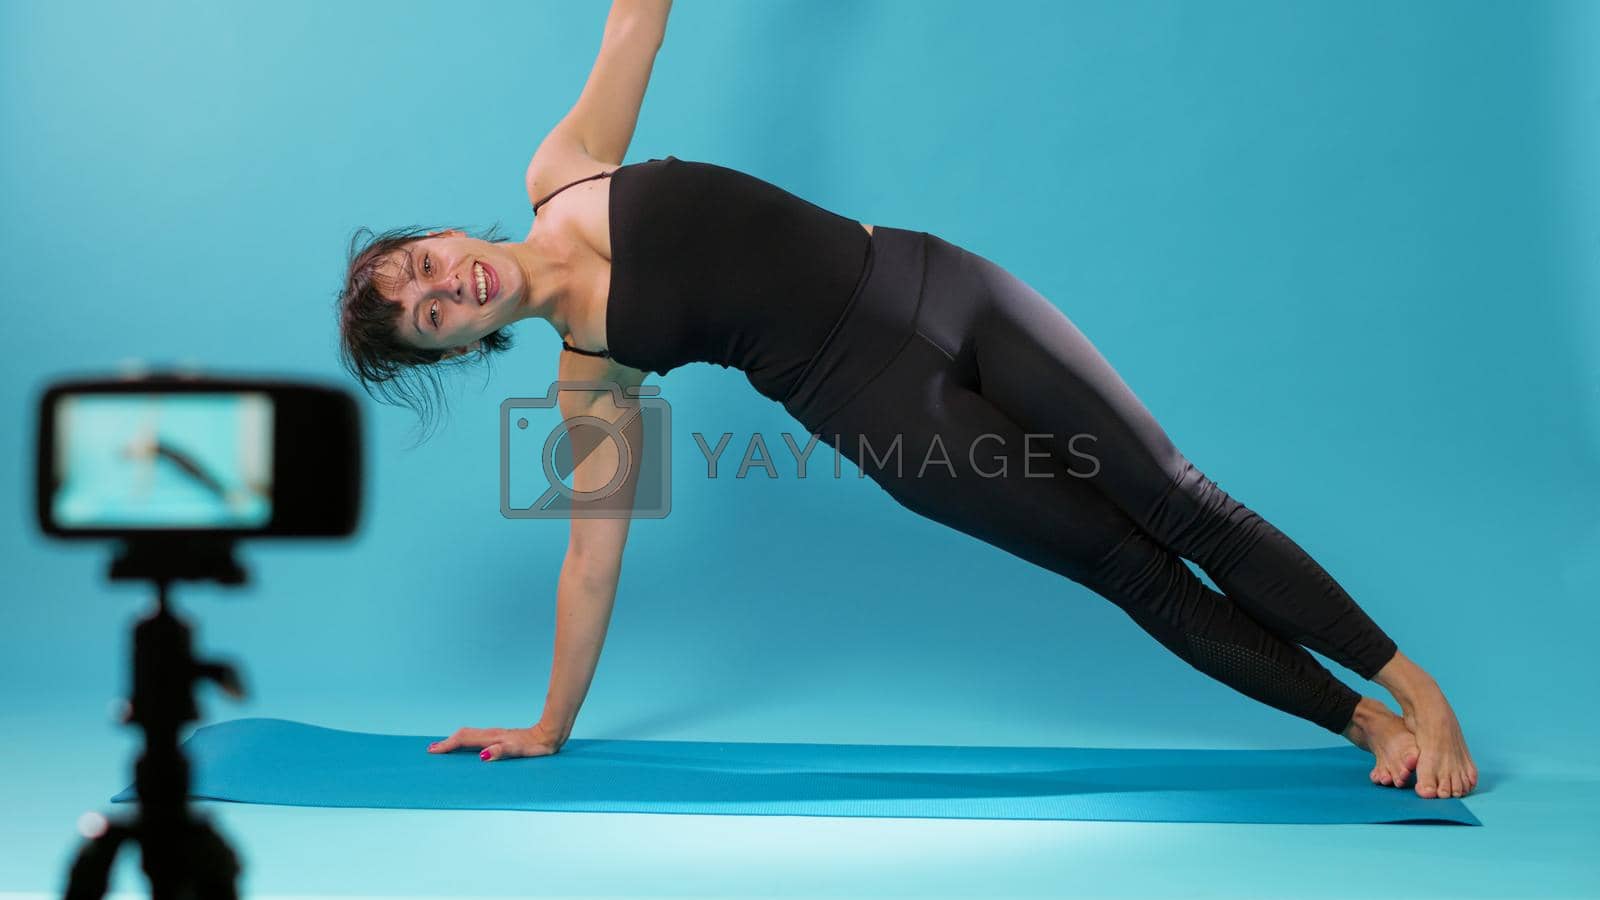 Yoga instructor filming stretching exercise on camera in studio, showing relaxing moves after intense body workout. Woman recording stretch activity on video for online training class.